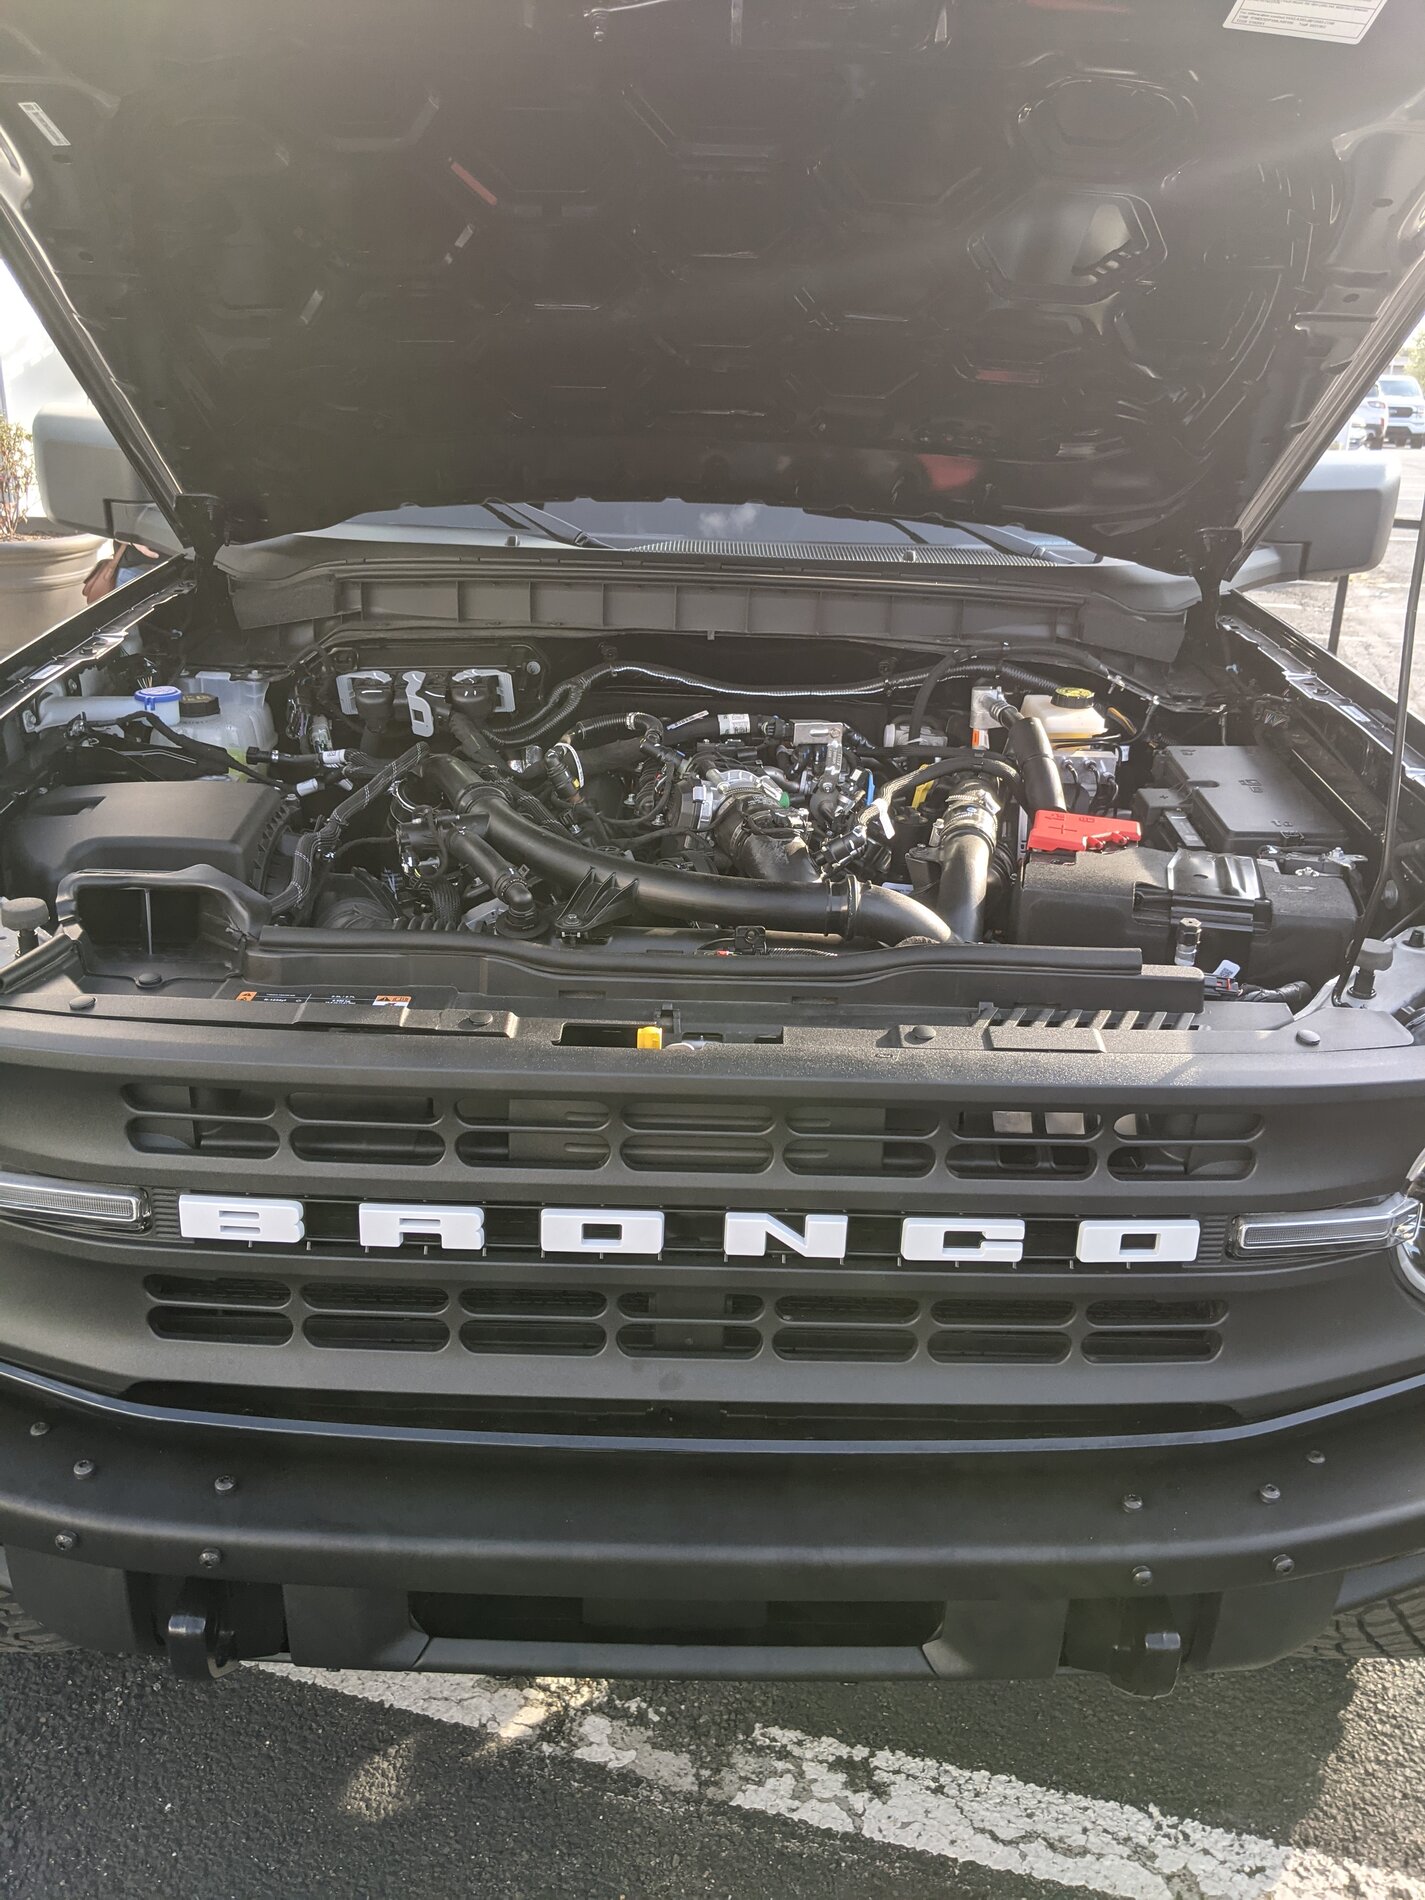 Ford Bronco In-person thoughts from a fence-sitter & outdoorsman PXL_20210408_215304803